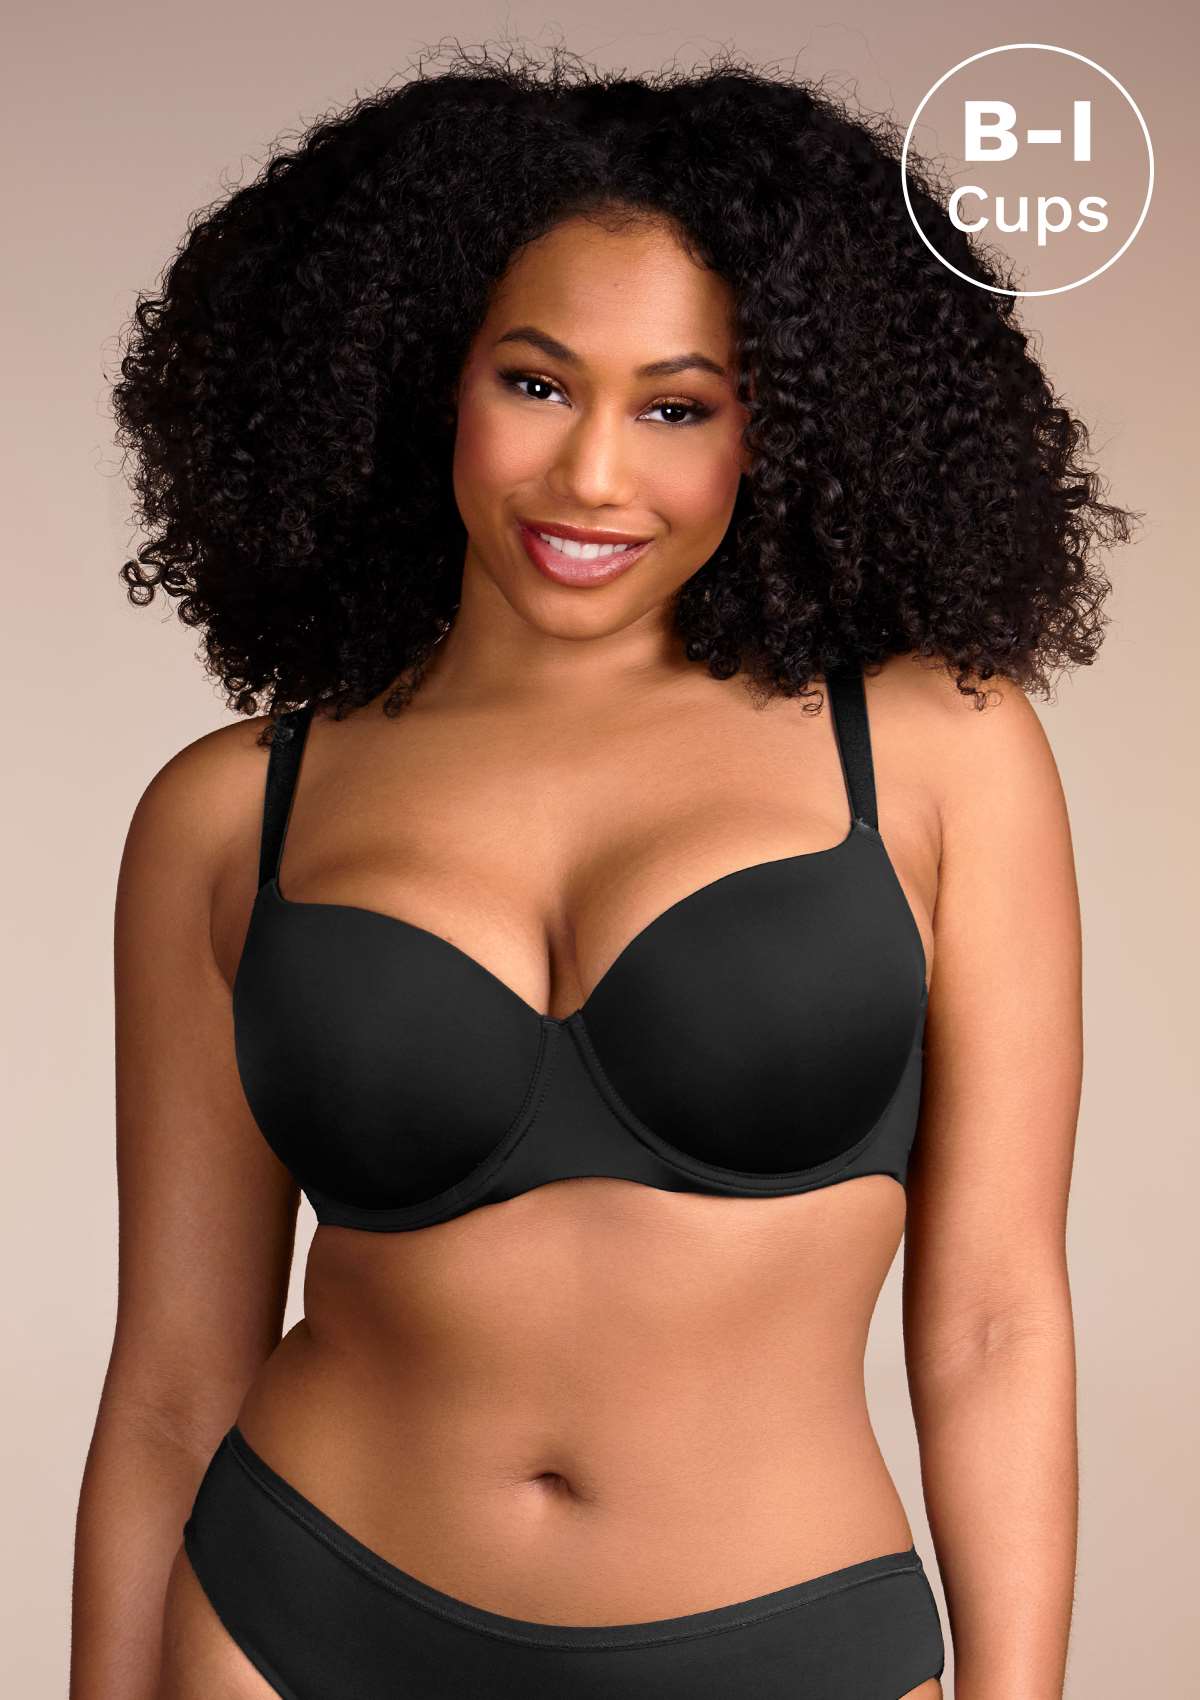 HSIA Gemma Smooth Padded T-shirt Everyday Bras - For Lift And Comfort - Black / 46 / C